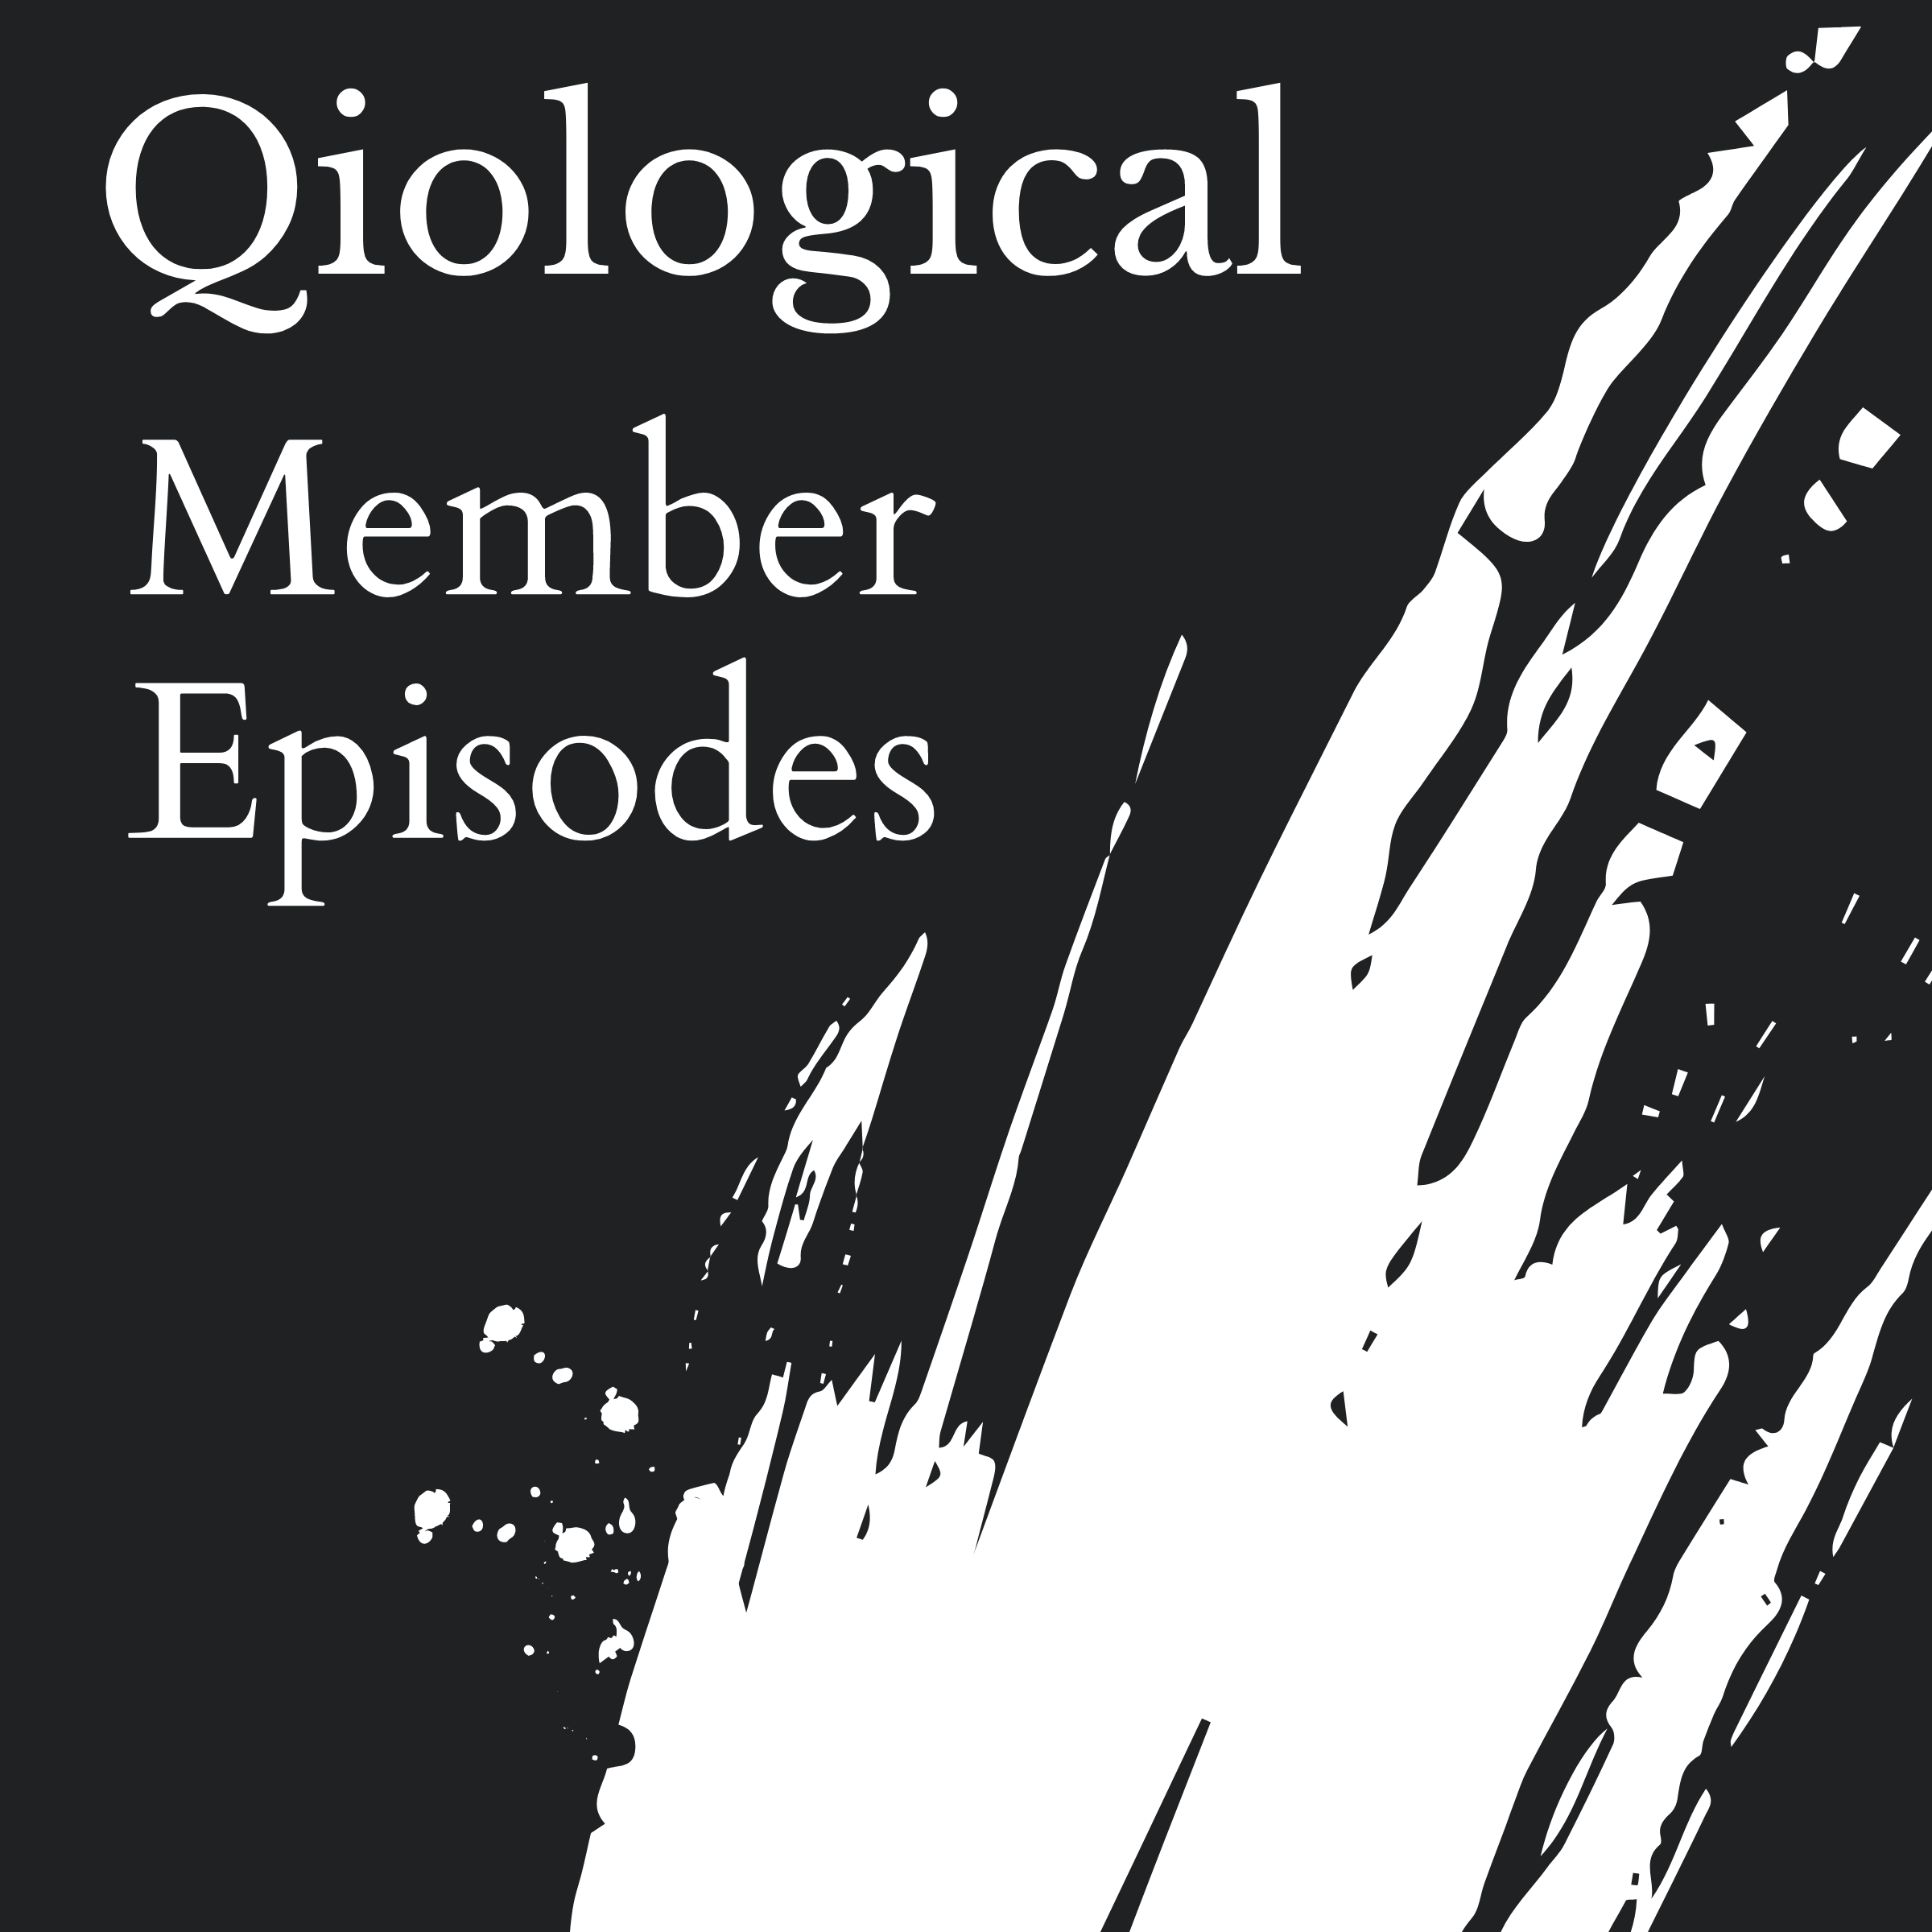 Artwork for podcast Qiologicians Podcast Feed (Member Feed)